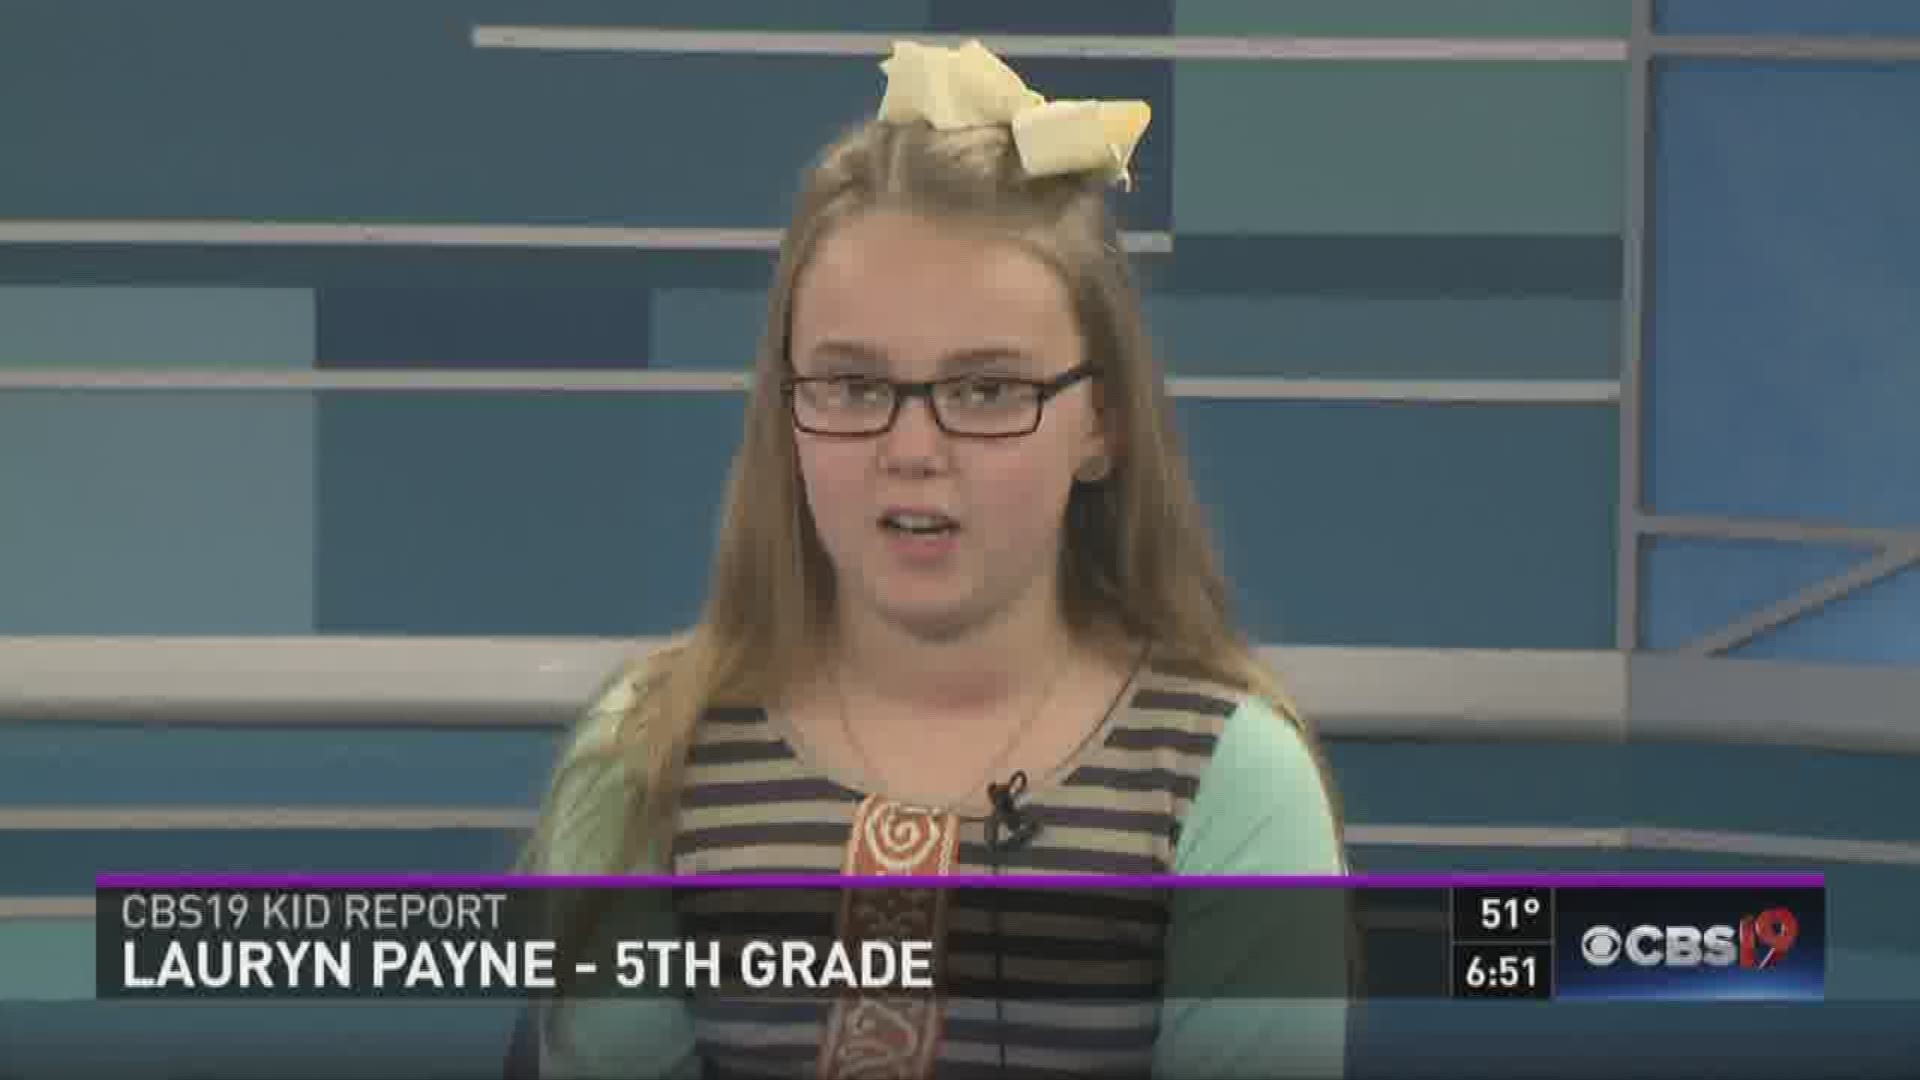 Lauryn Payne joined CBS19 this morning for the Kid Report. She's a fifth grade student at Higgins Elementary in Whitehouse. 